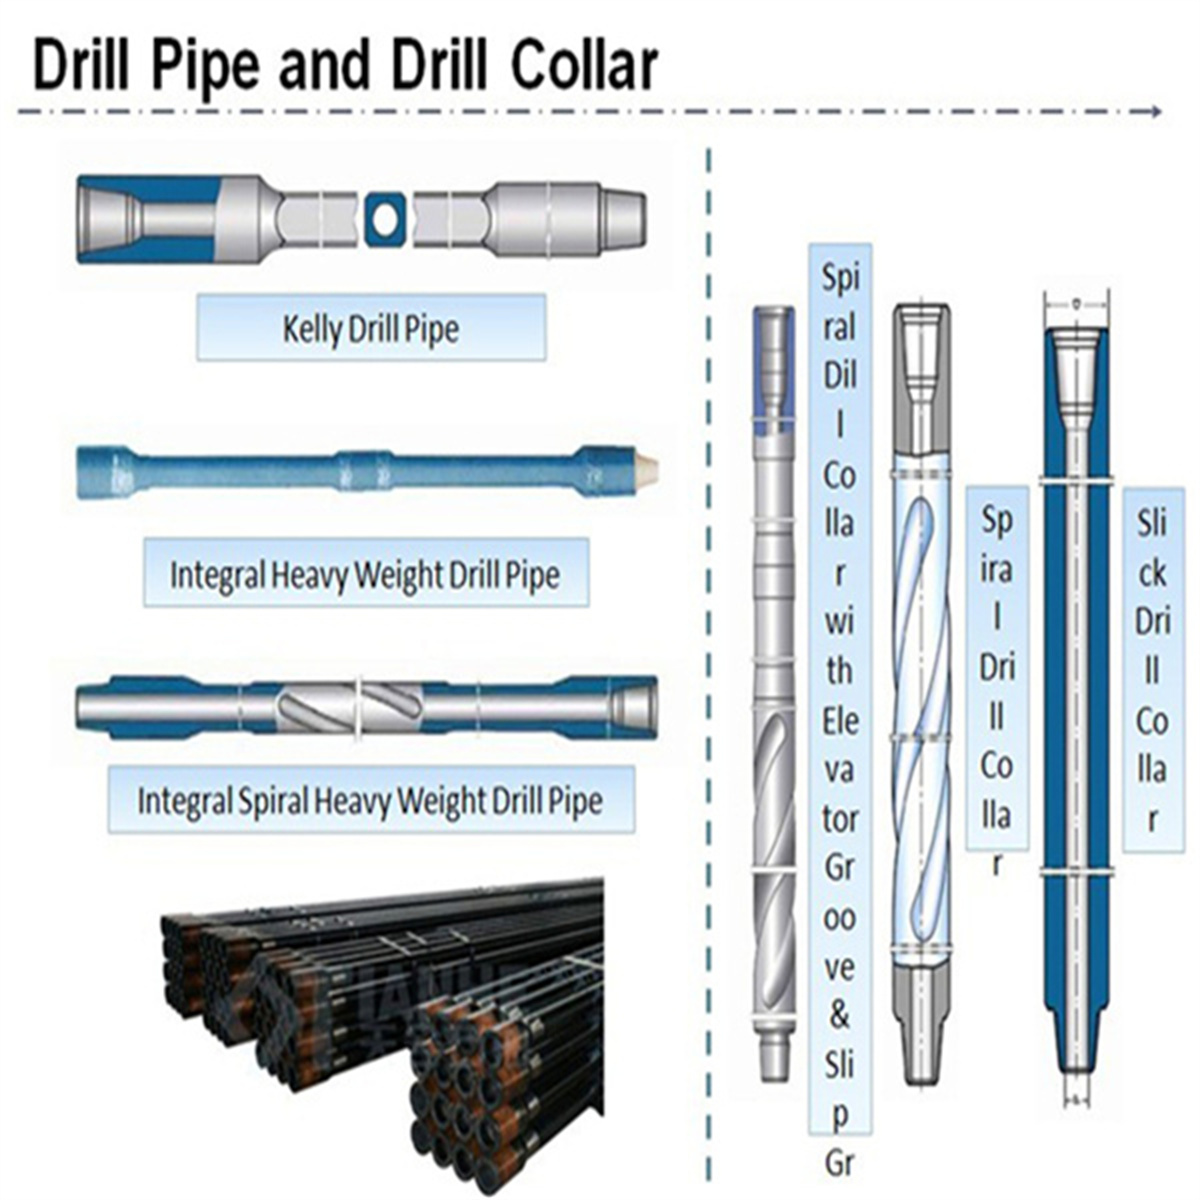 API 5L Casing-Drill-Pipe-Steel Tube yeOil-Well-Drilling (41)